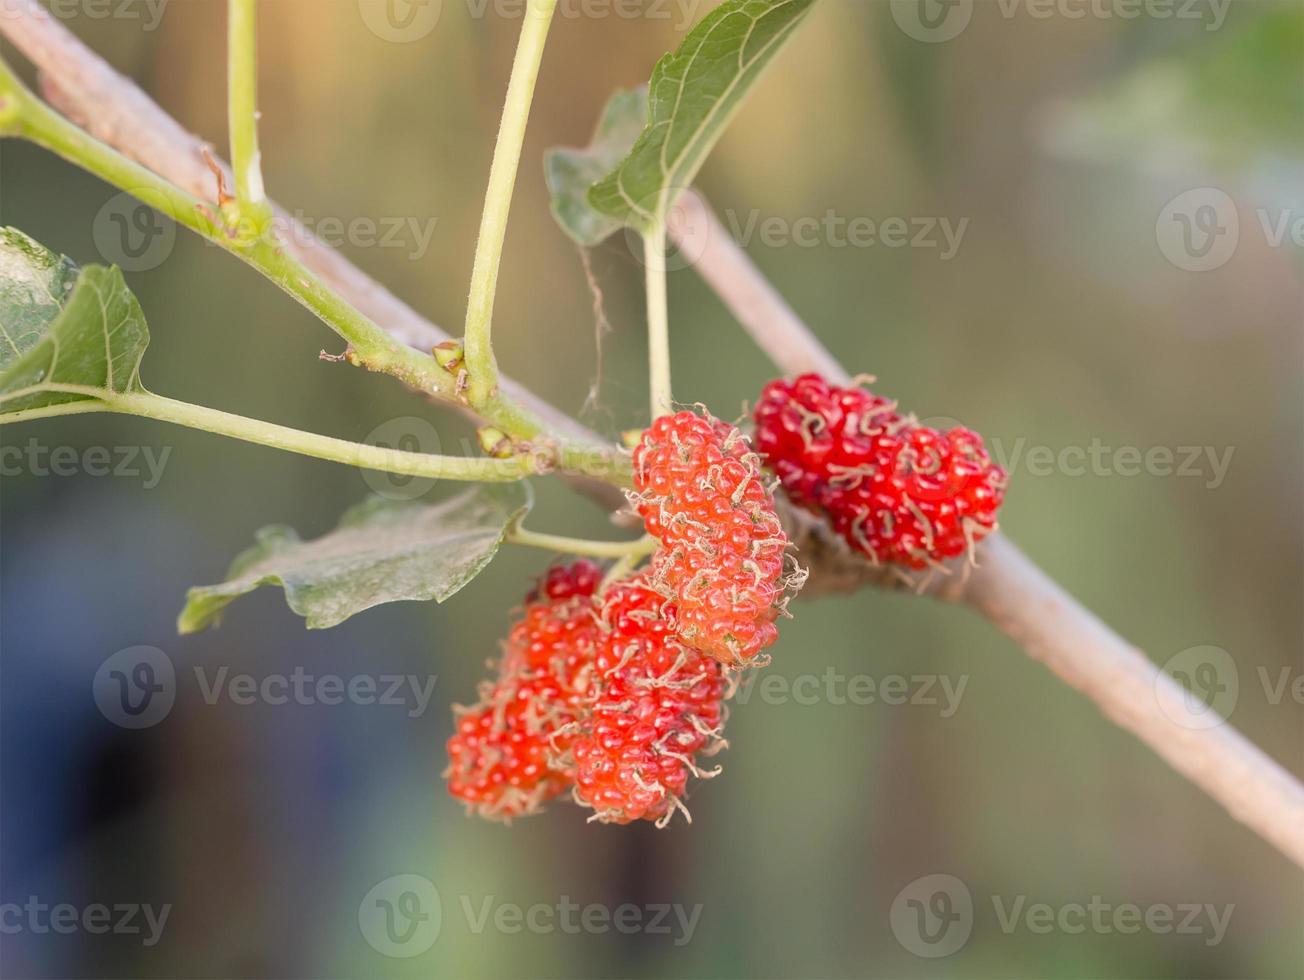 Mulberry on tree is Berry fruit in nature photo